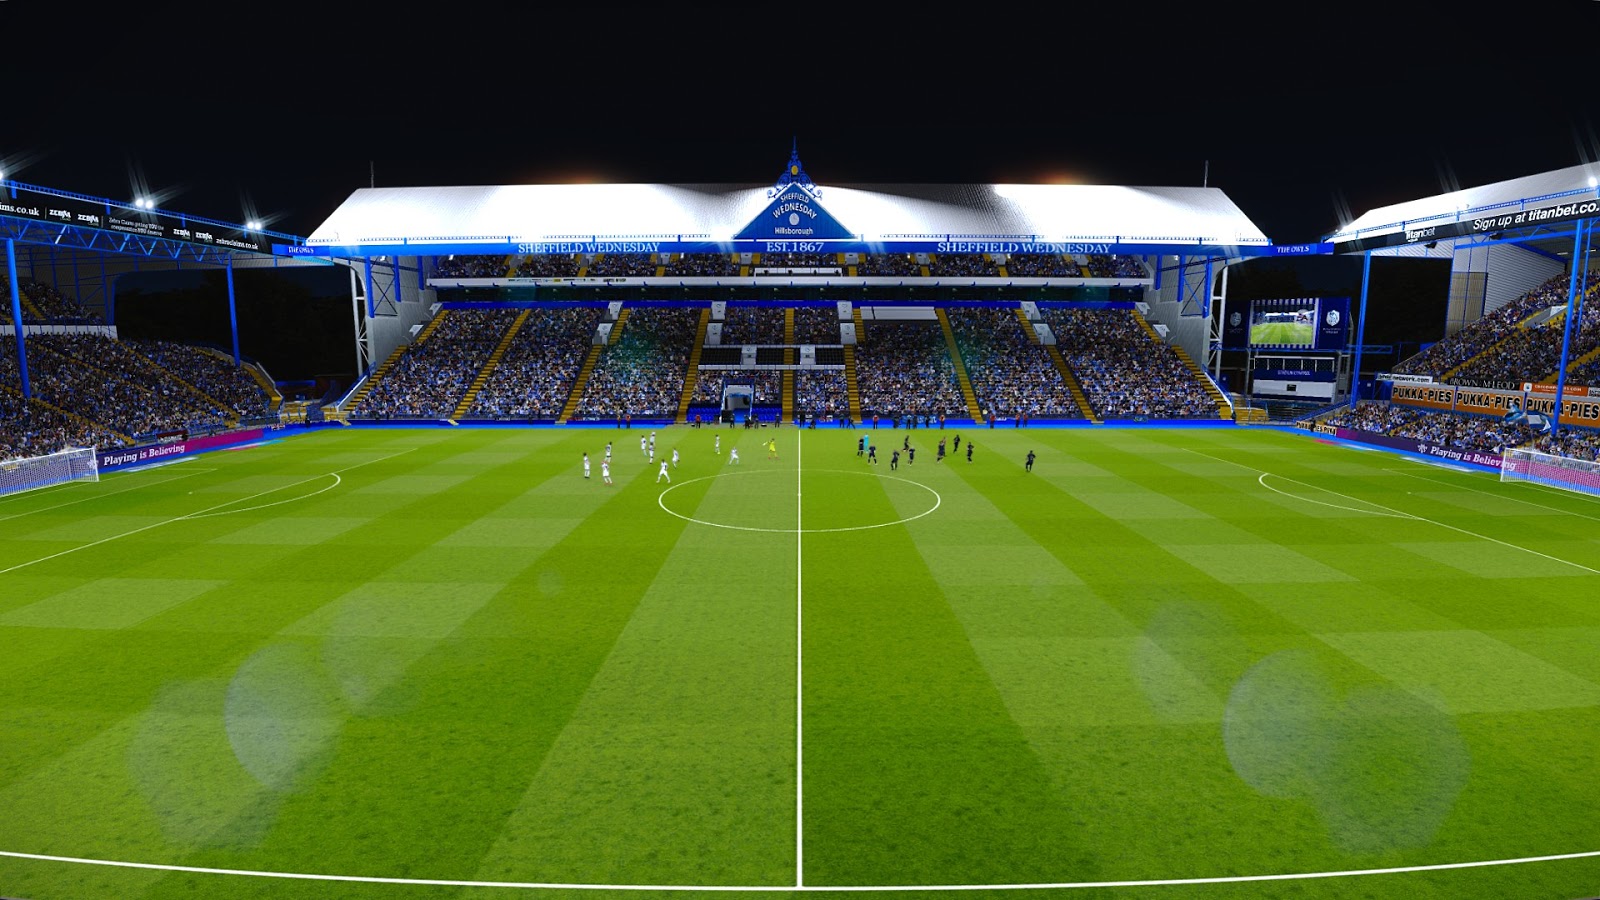 PES 2020 Hillsborough Stadium Created by Orsest for PES 2019 (converted by AlexFreen for PES 2020)